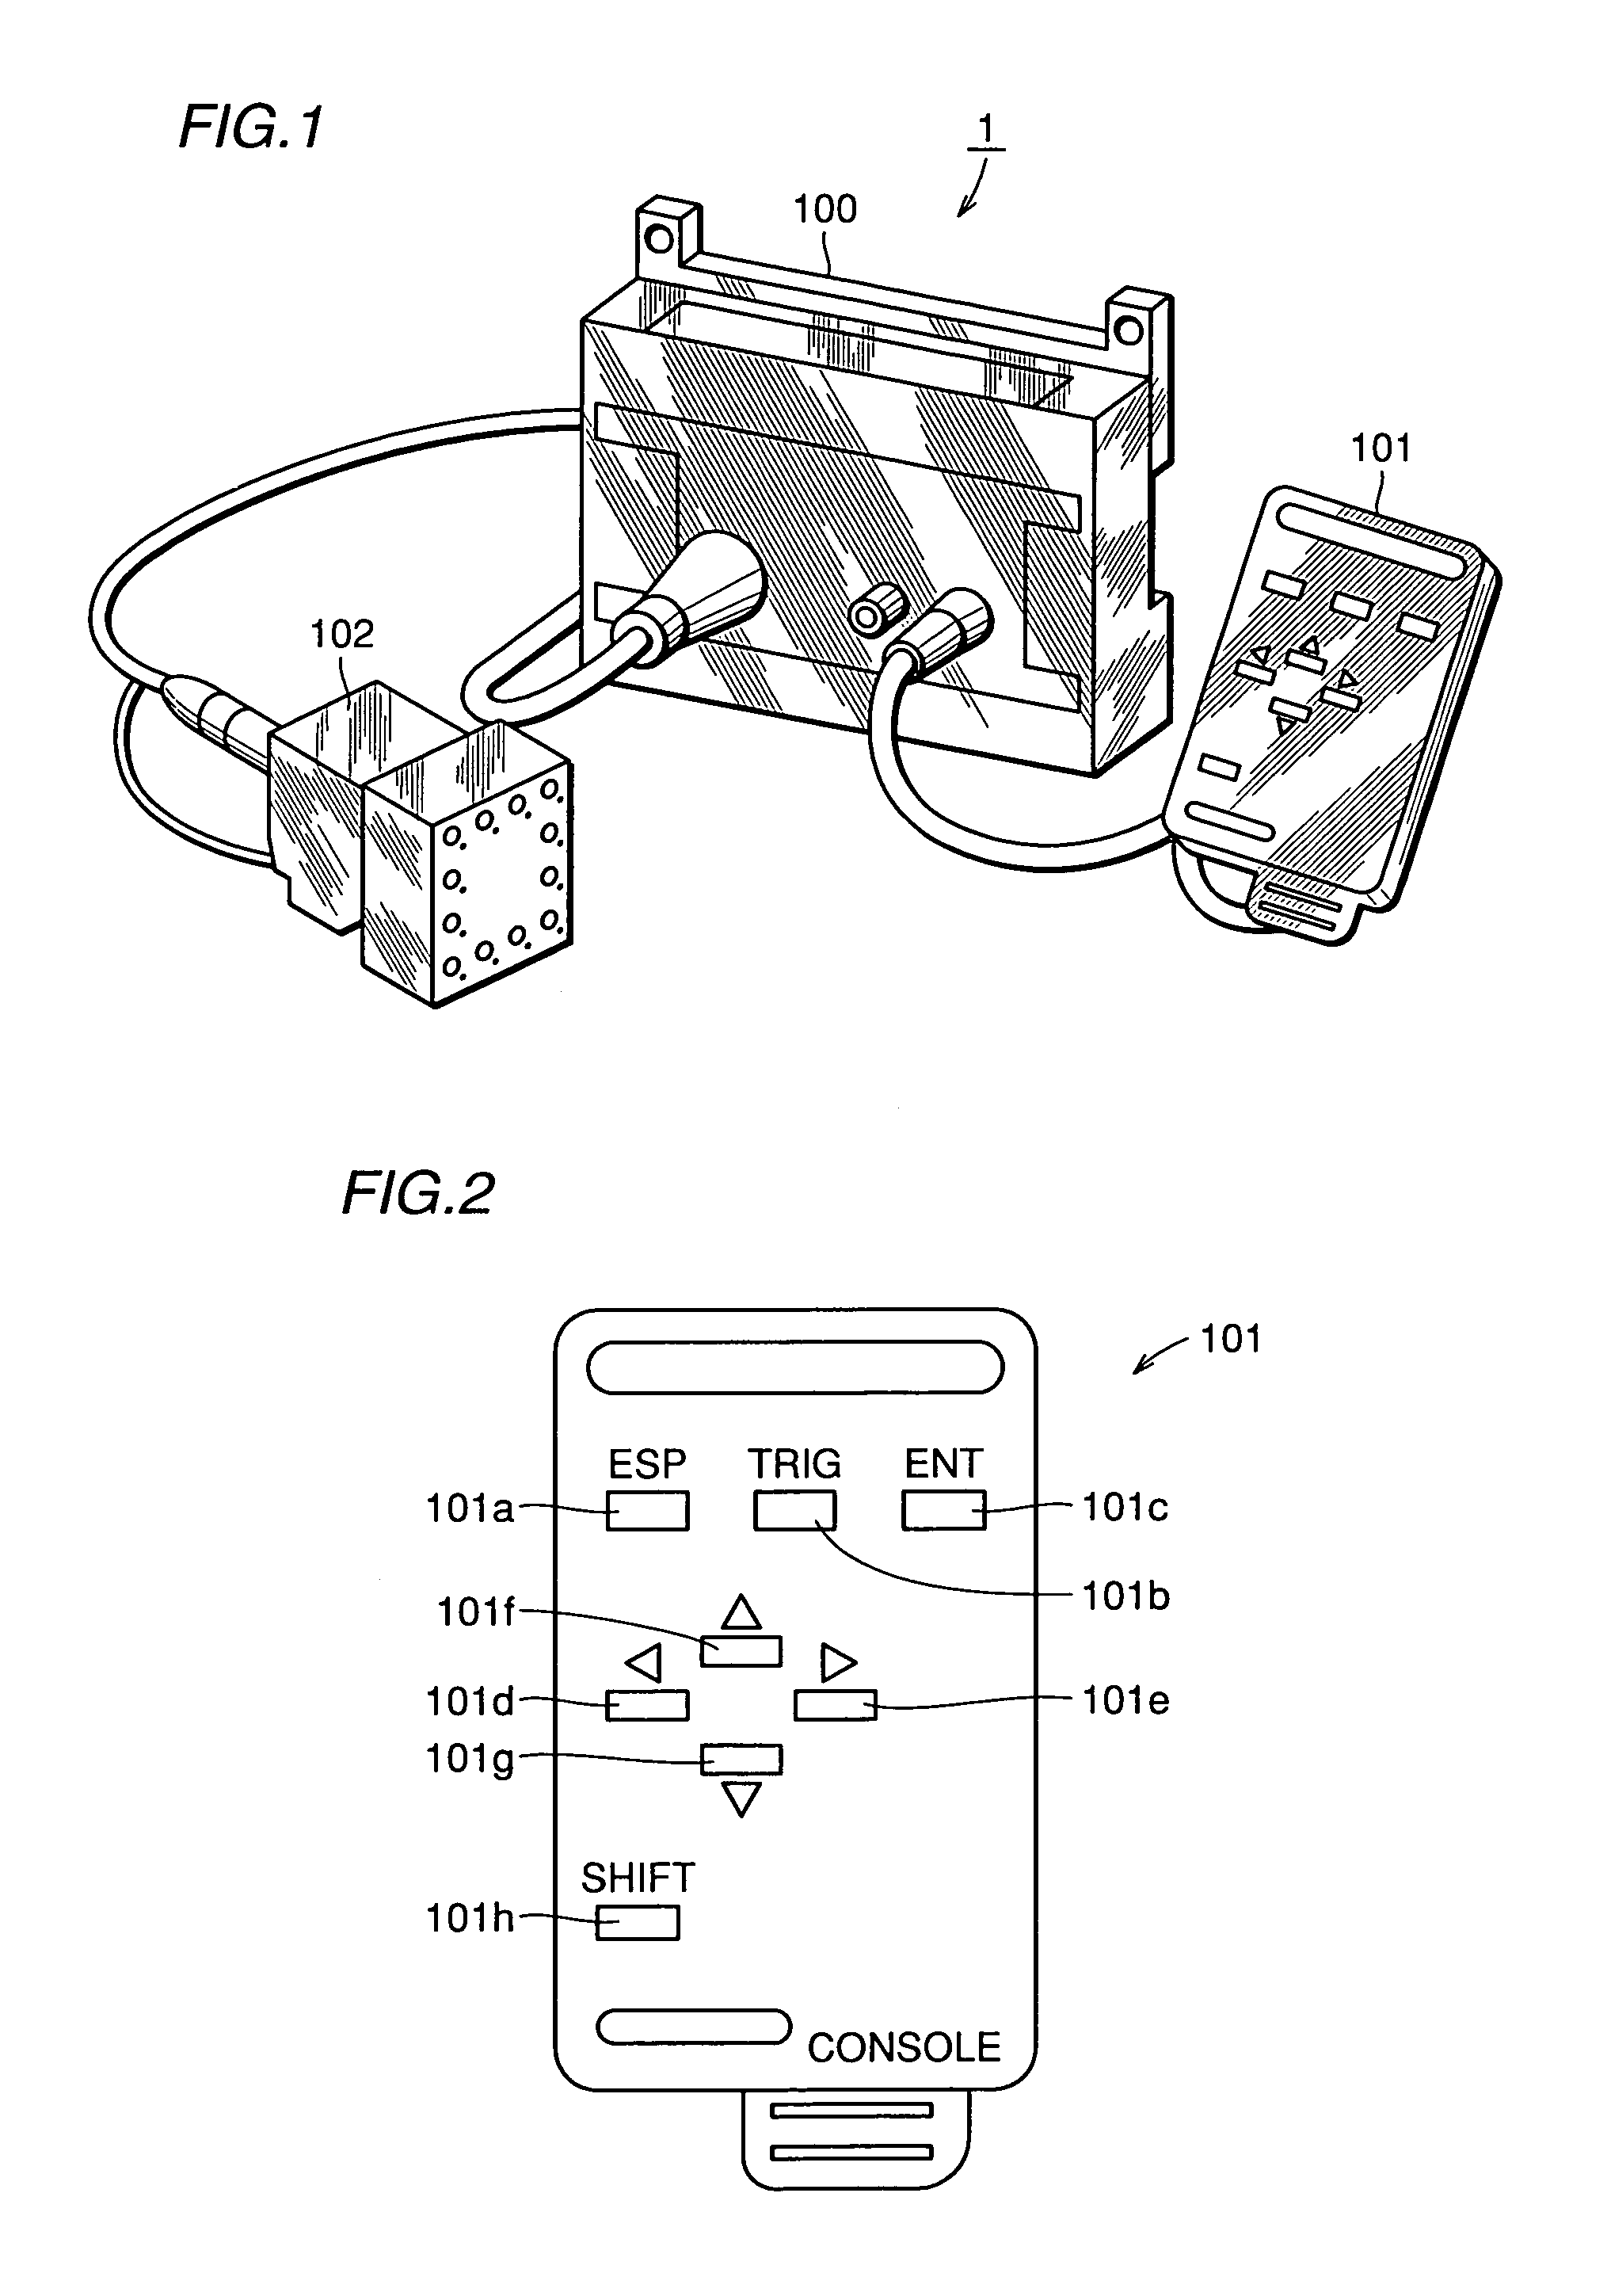 Image processing apparatus, image processing method and visual inspection system